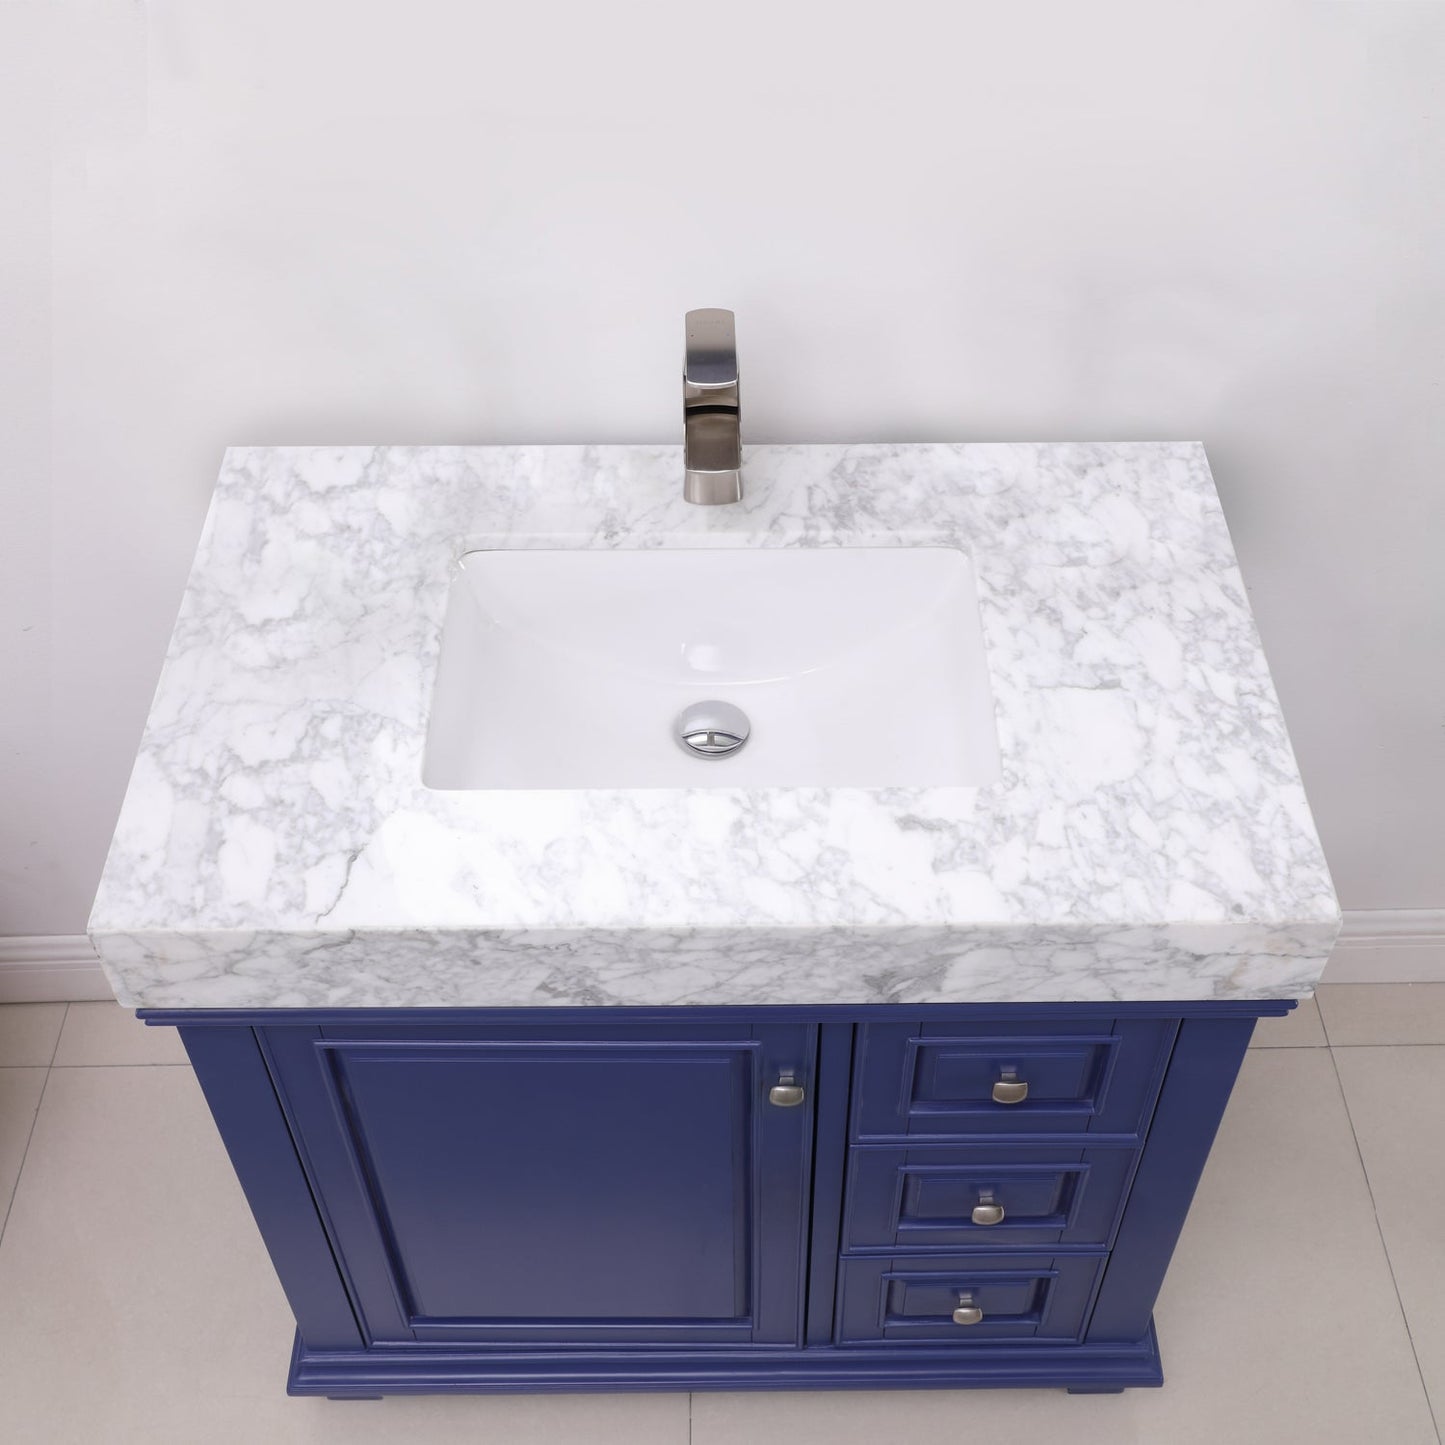 Jardin 36" Single Bathroom Vanity Set in Jewelry Blue and Carrara White Marble Countertop without Mirror